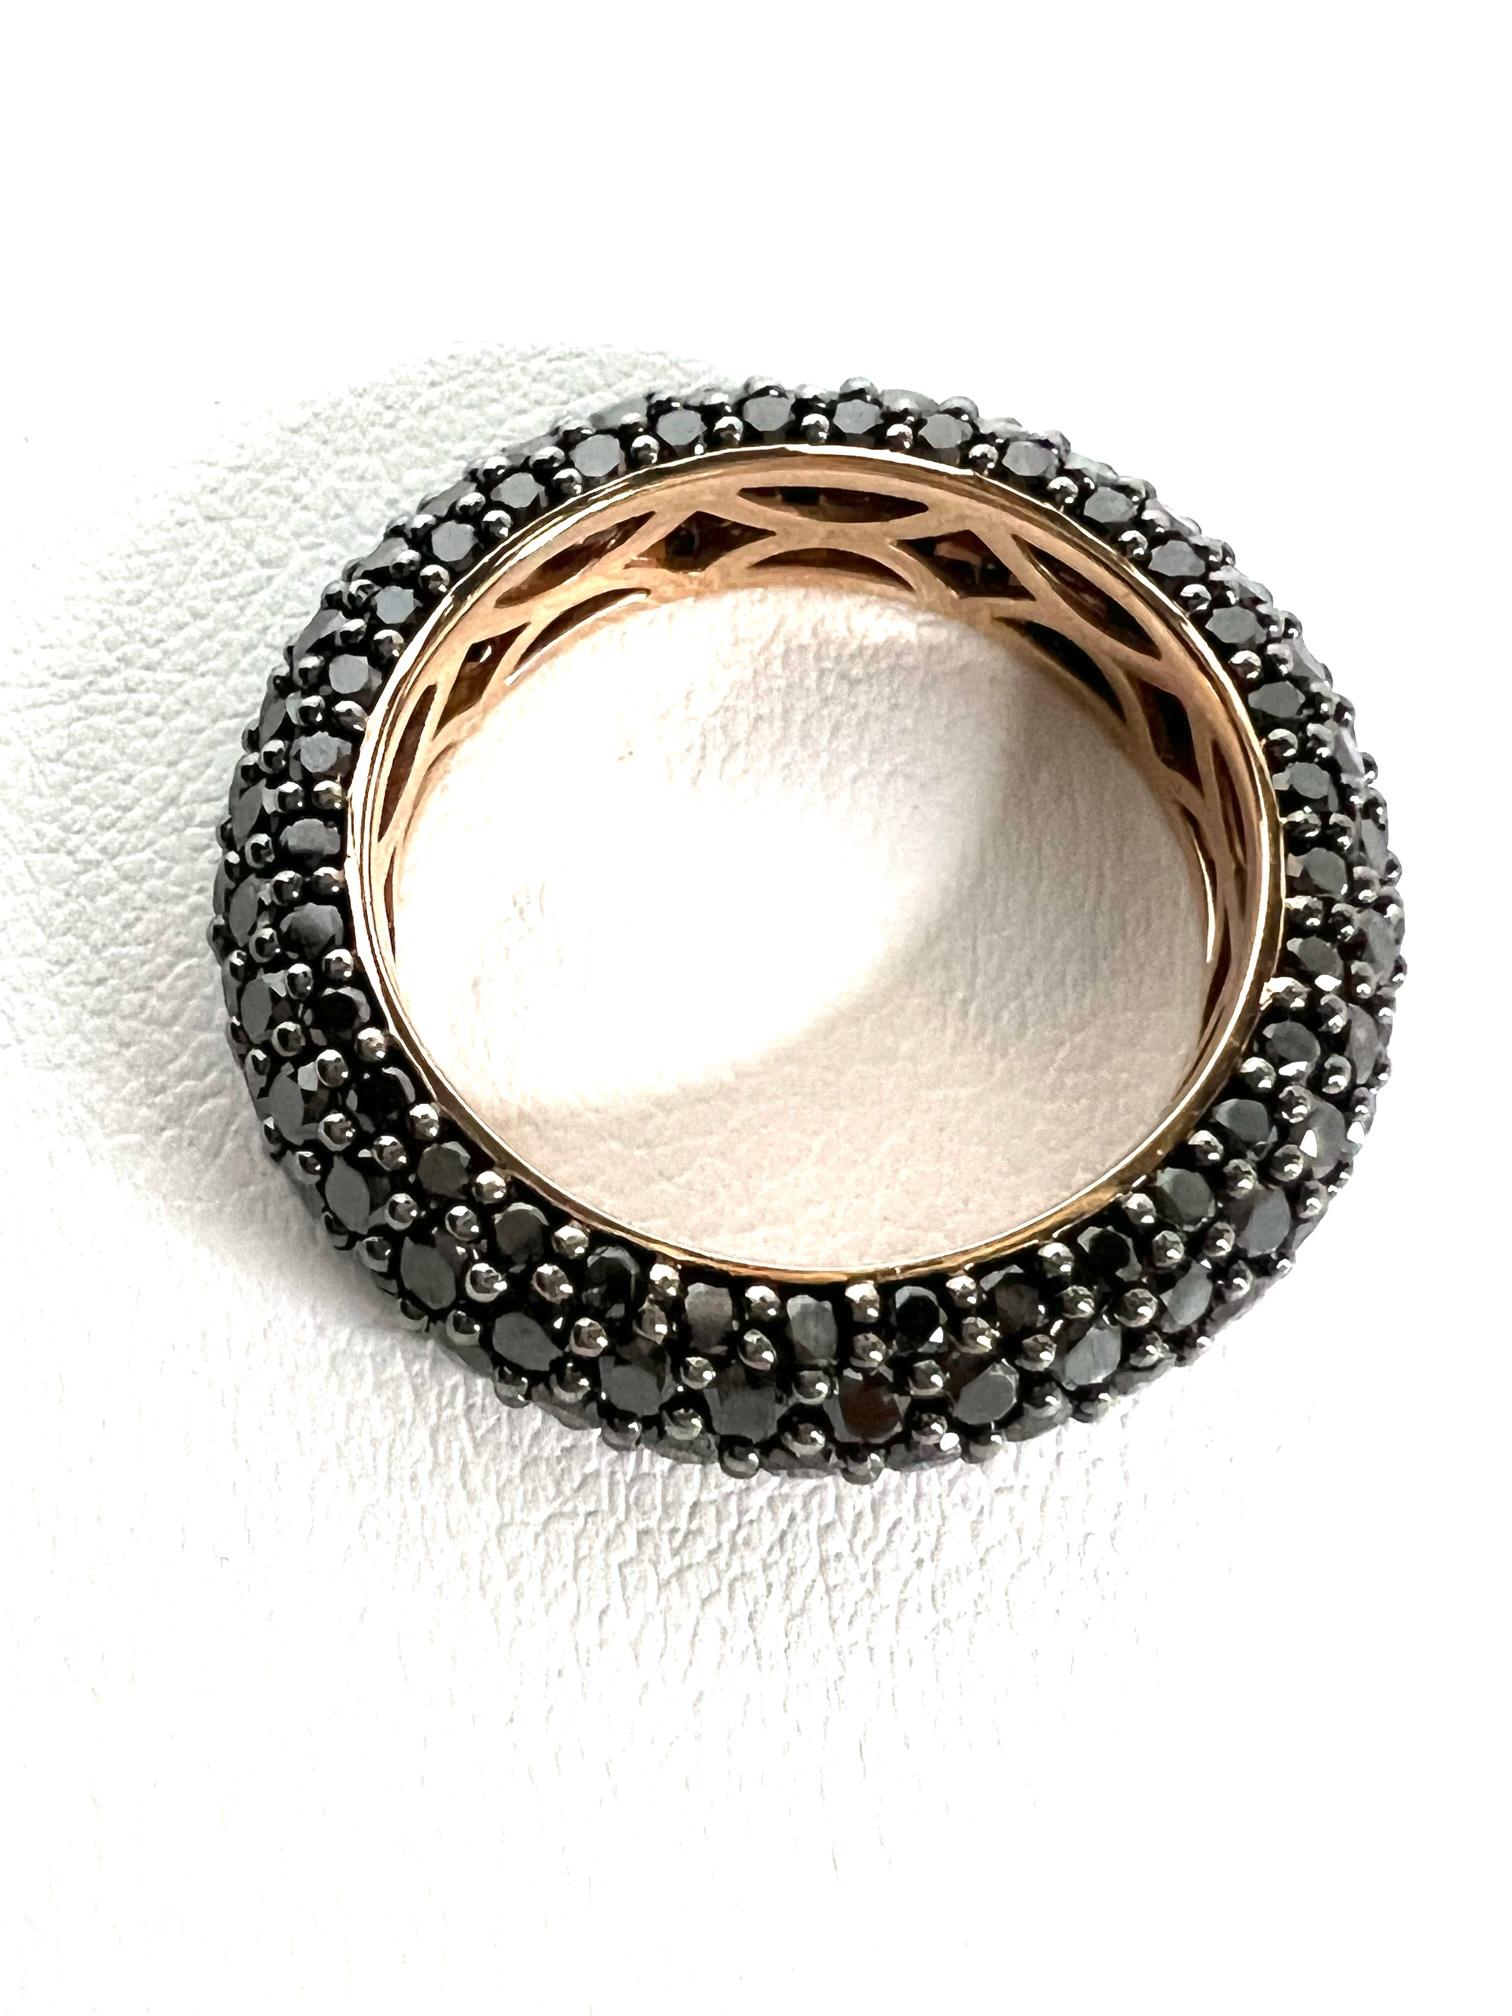 Thomas Leyser is renowned for his contemporary jewellery designs utilizing fine gemstones.

1 ring in 18k red gold 5,1gr. with 165 black diamonds treated, round 1.3mm, 3,95cts..

This ring size 56 (7,5) is unsizable.